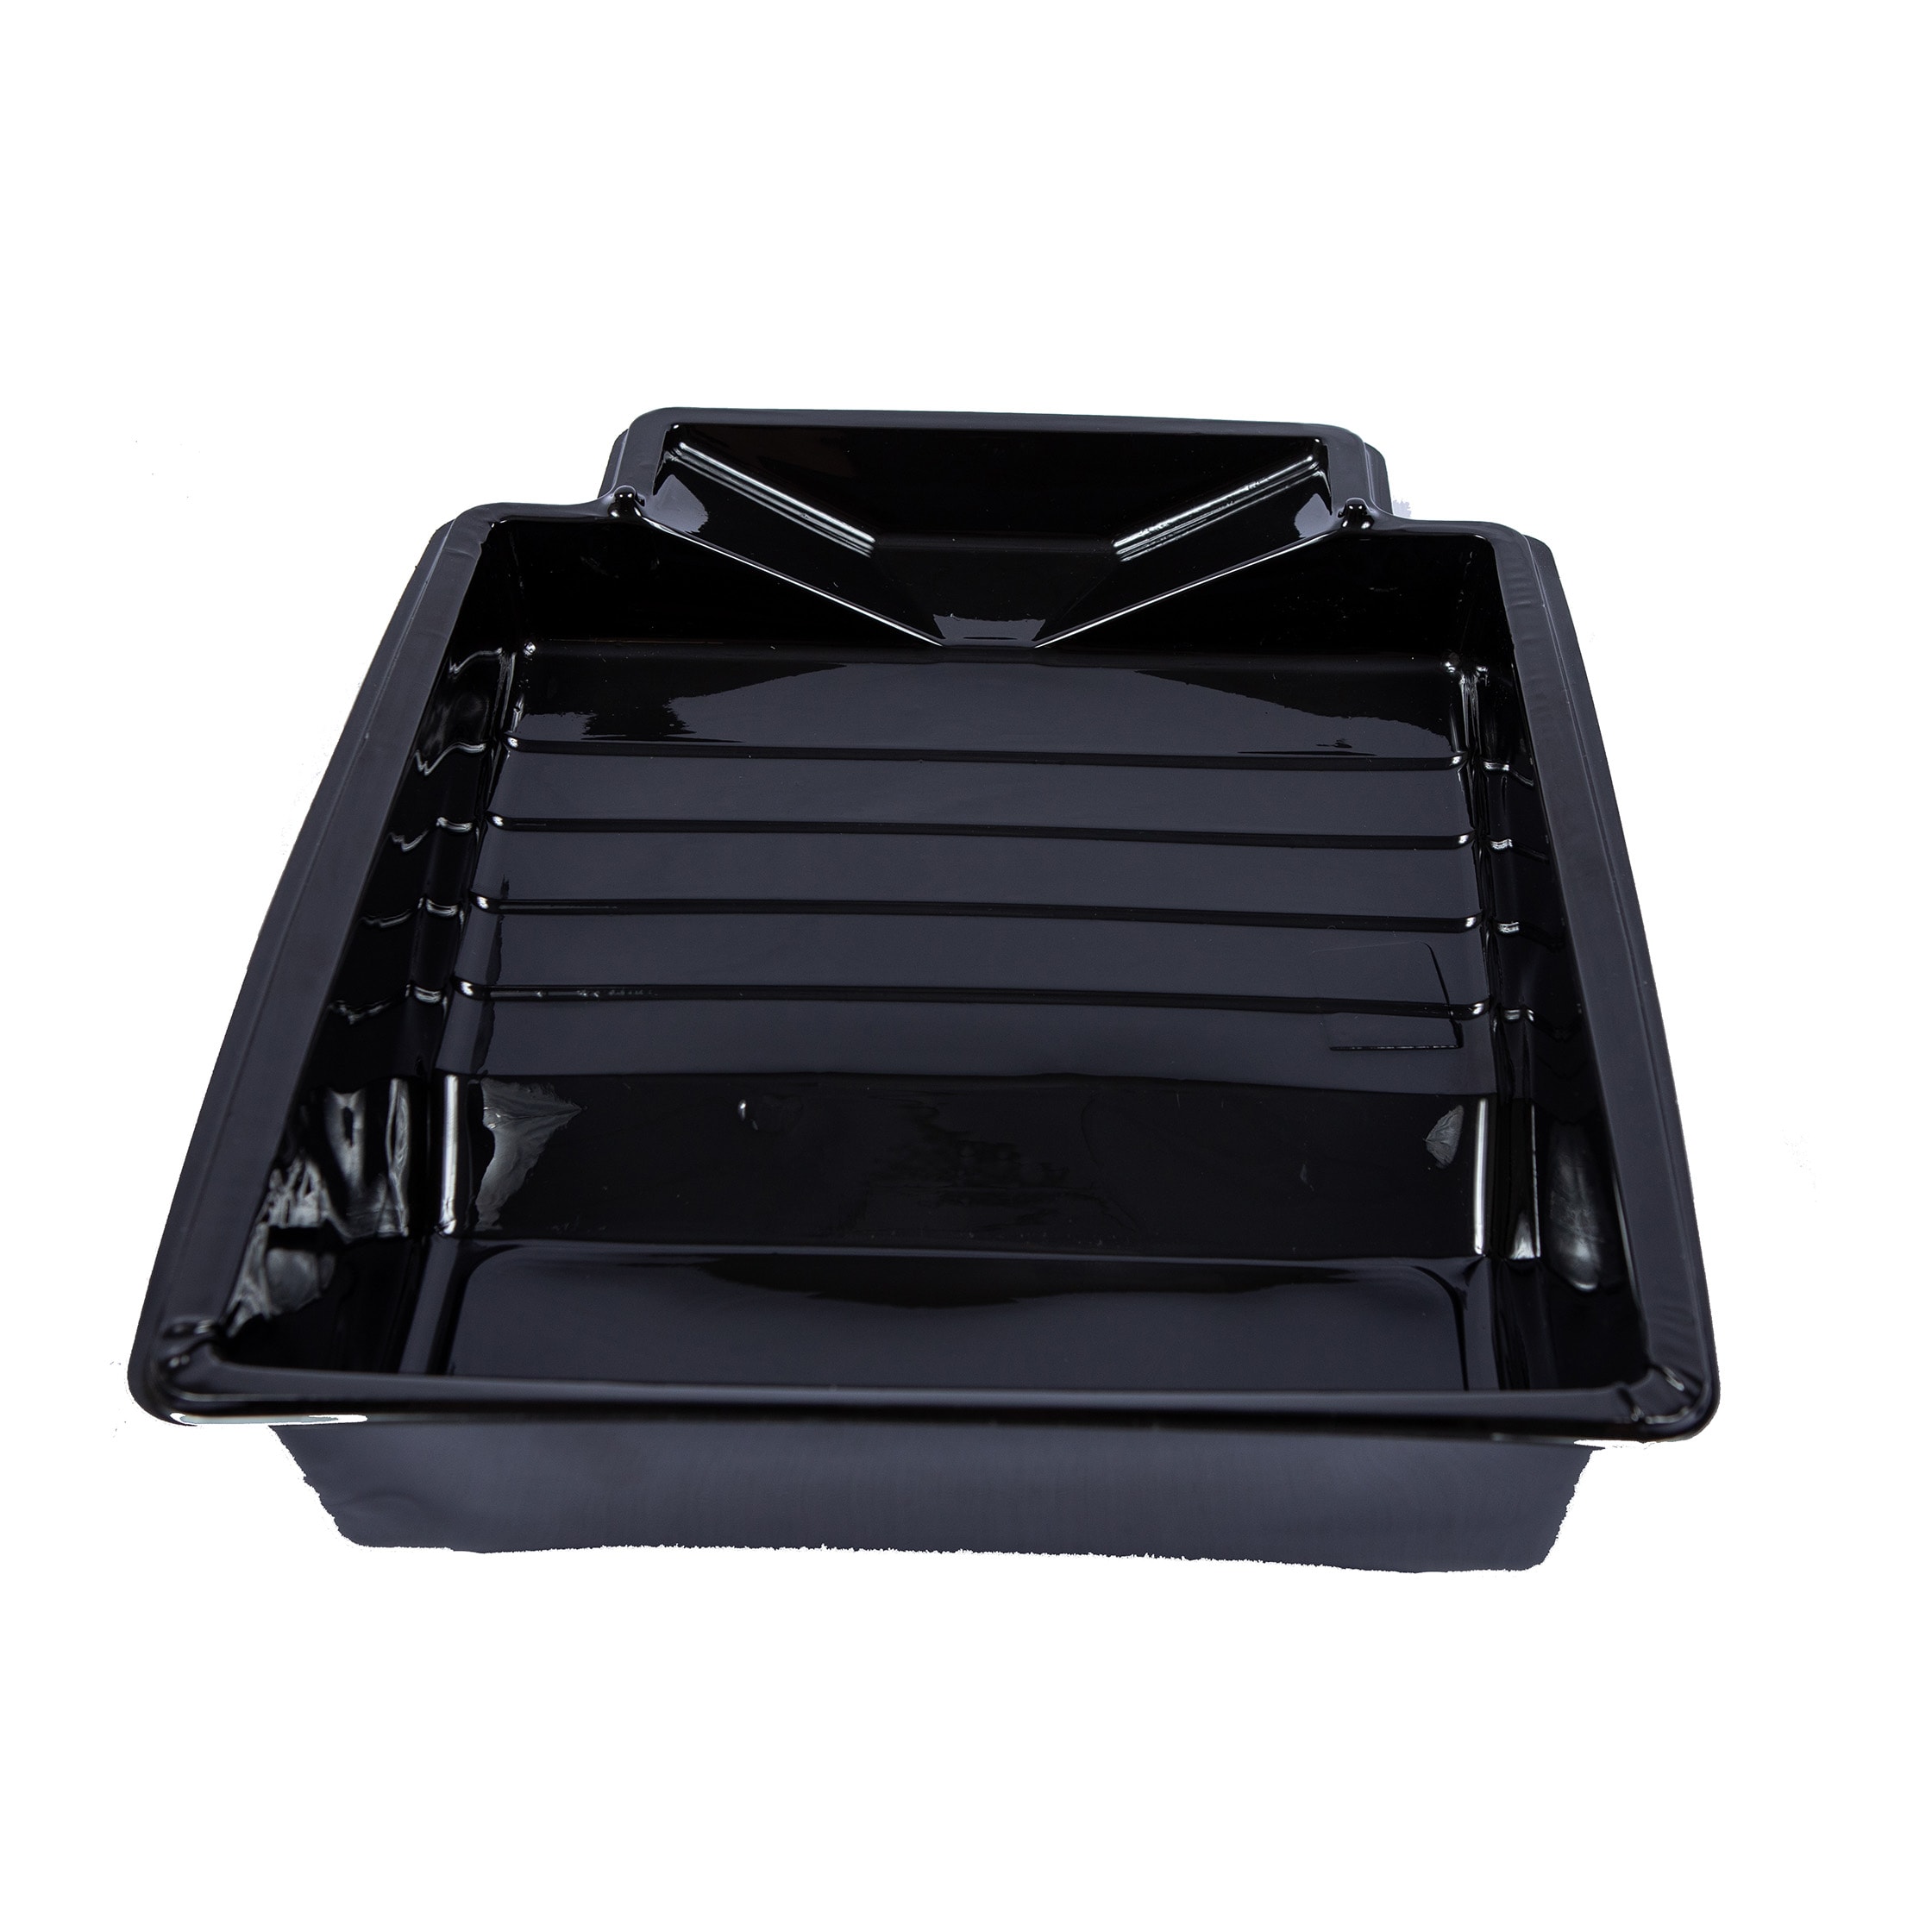 ALLPRO Plastic Tray Liner – Hoover Paint